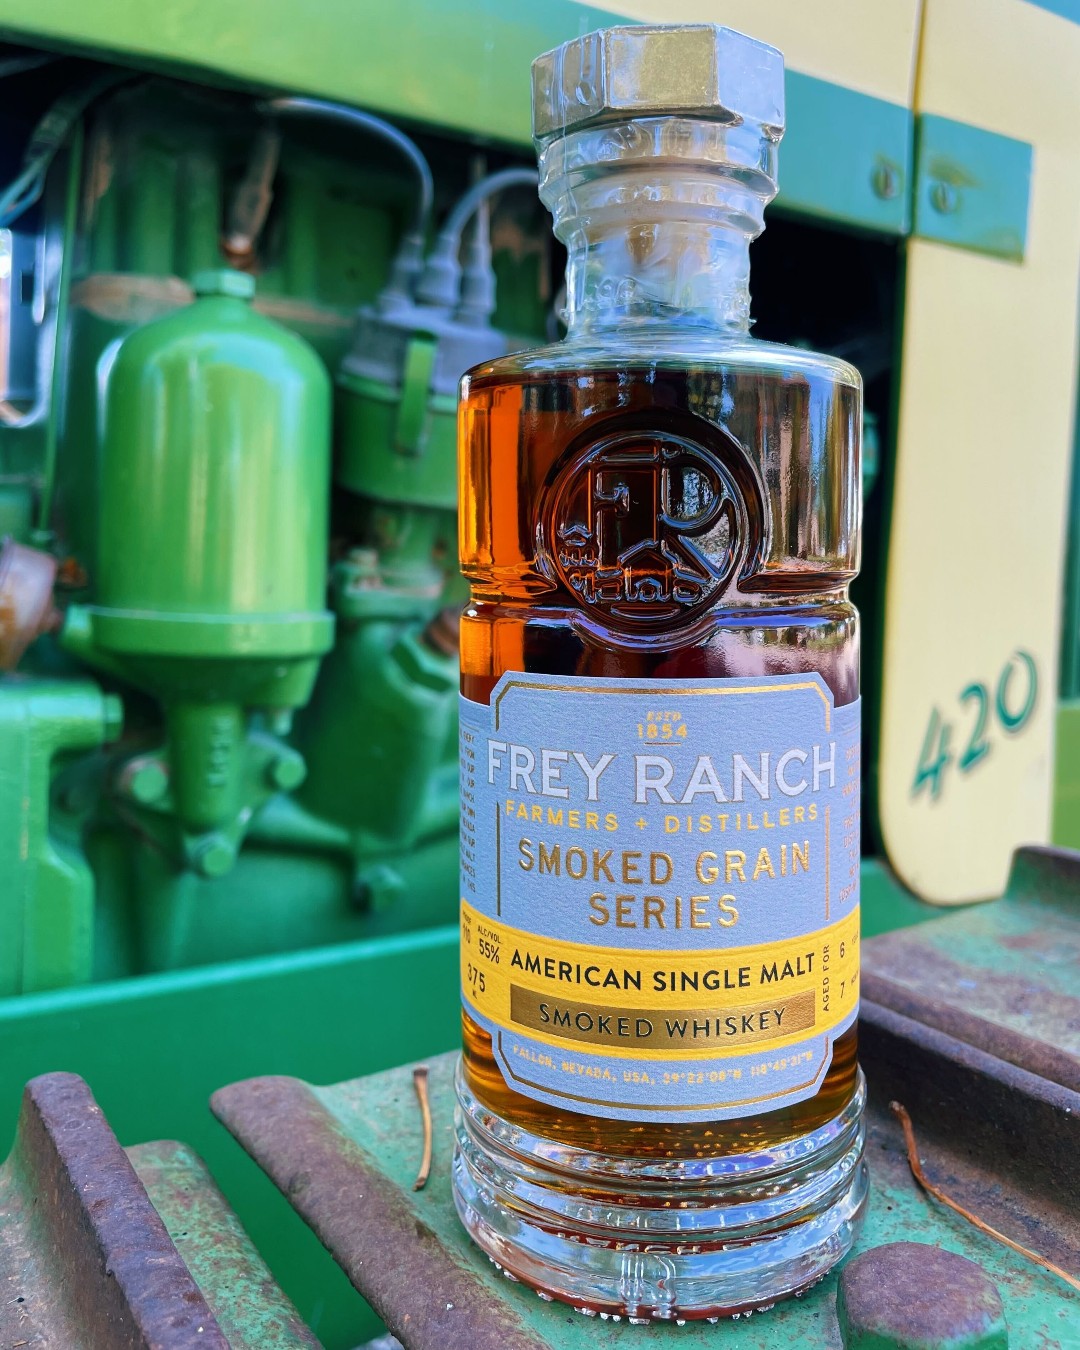 New Limited-Edition Frey Ranch American Single Malt Smoked Whiskey